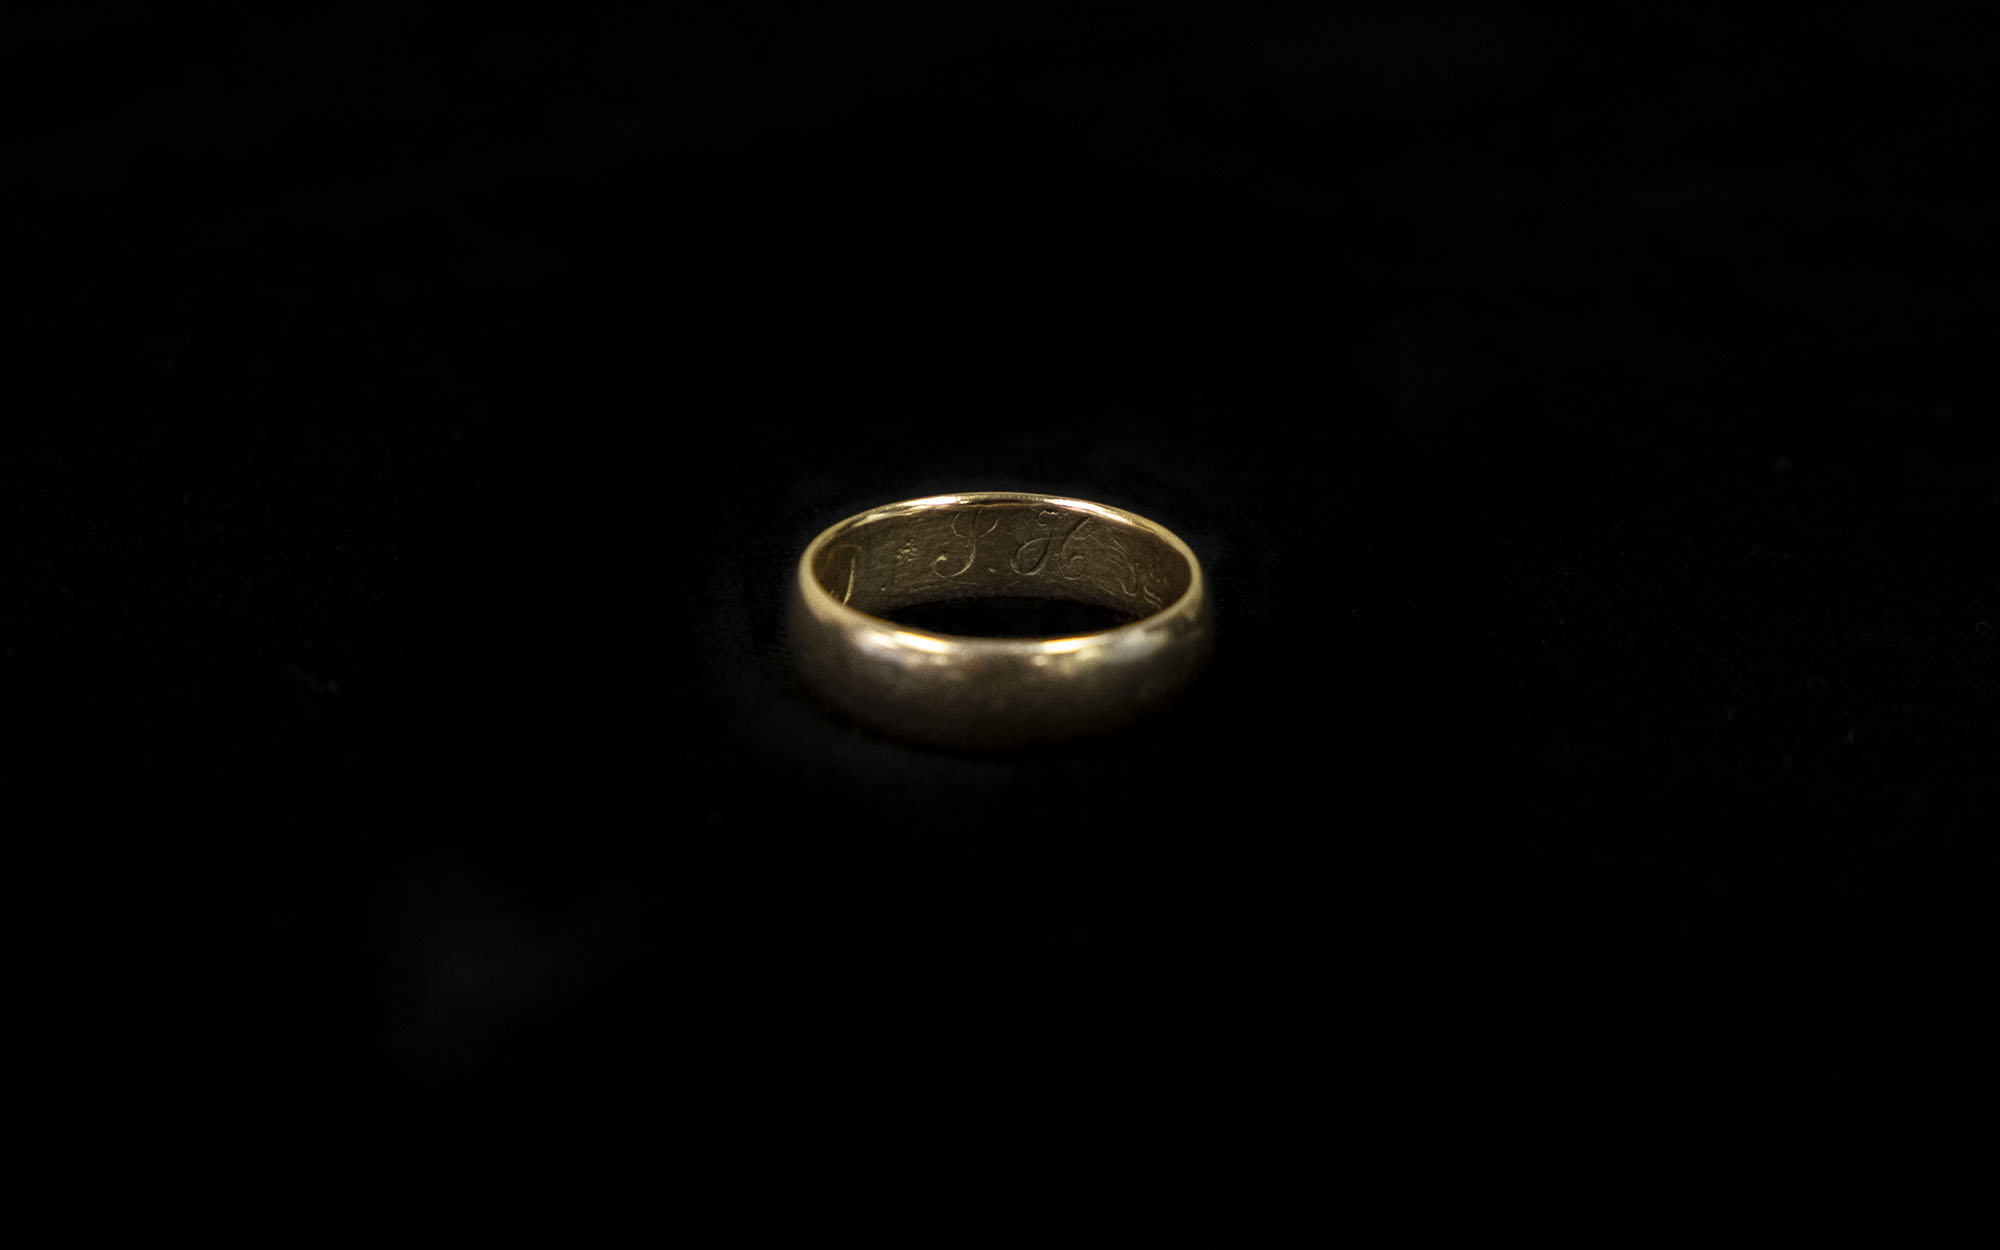 A ring with initials inscribed on the inside